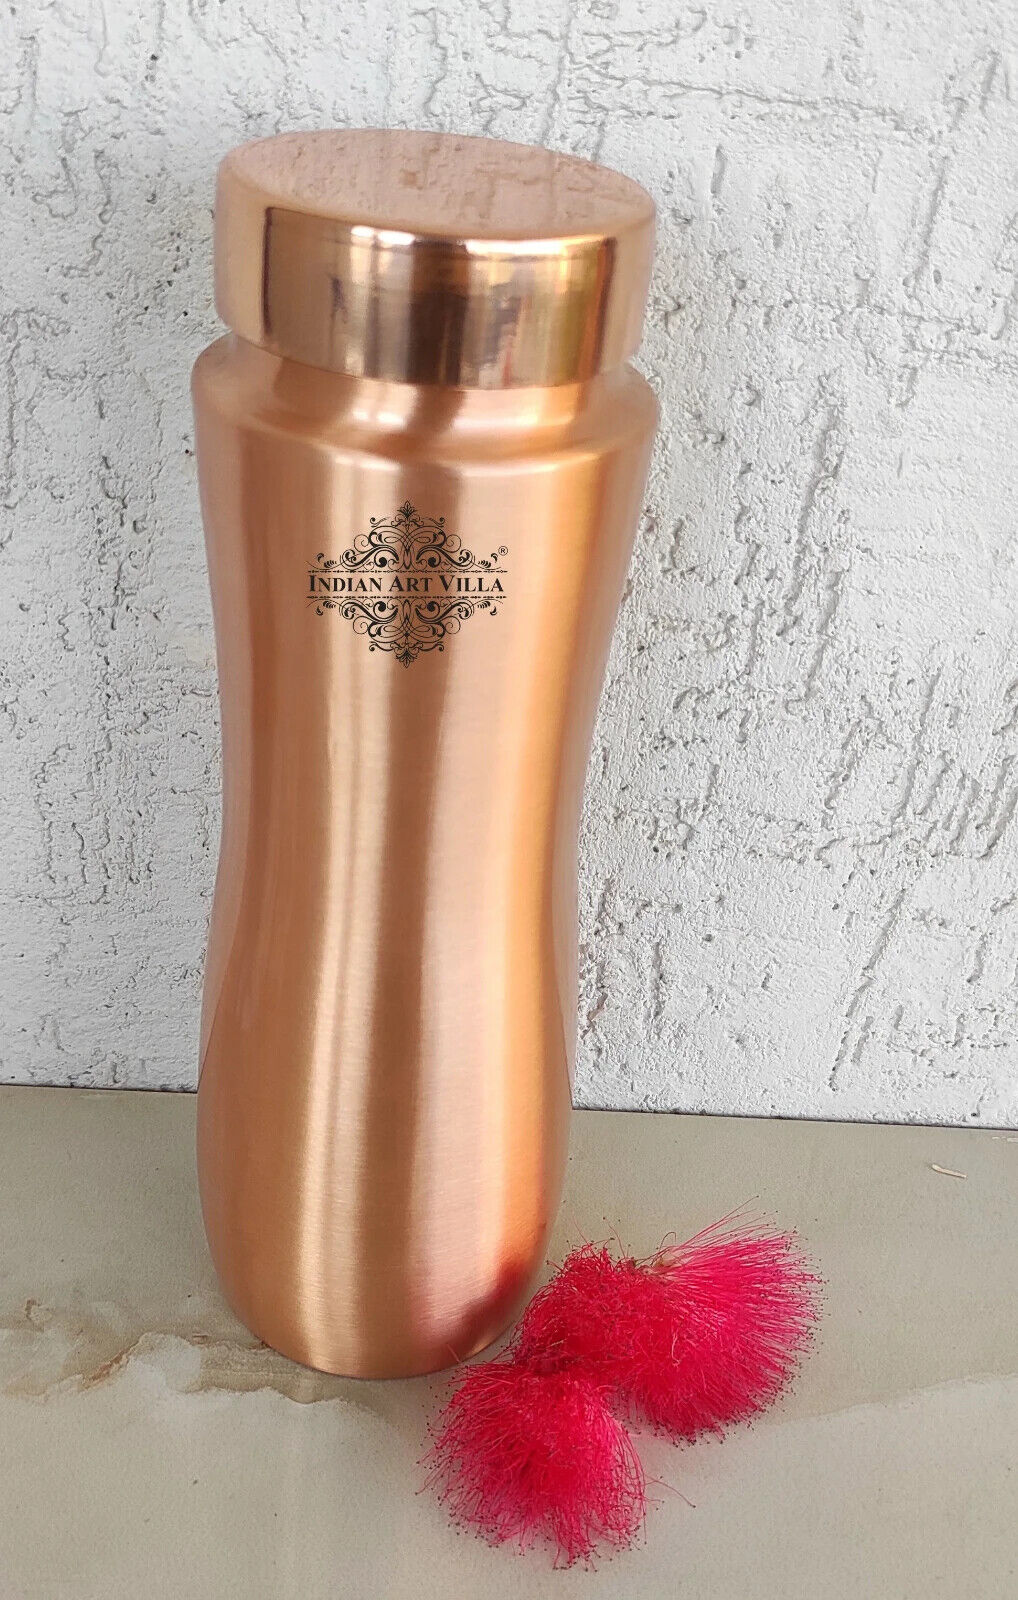 100% Pure Copper Water Bottle for Yoga / Ayurveda Health Benefits 1000 ml